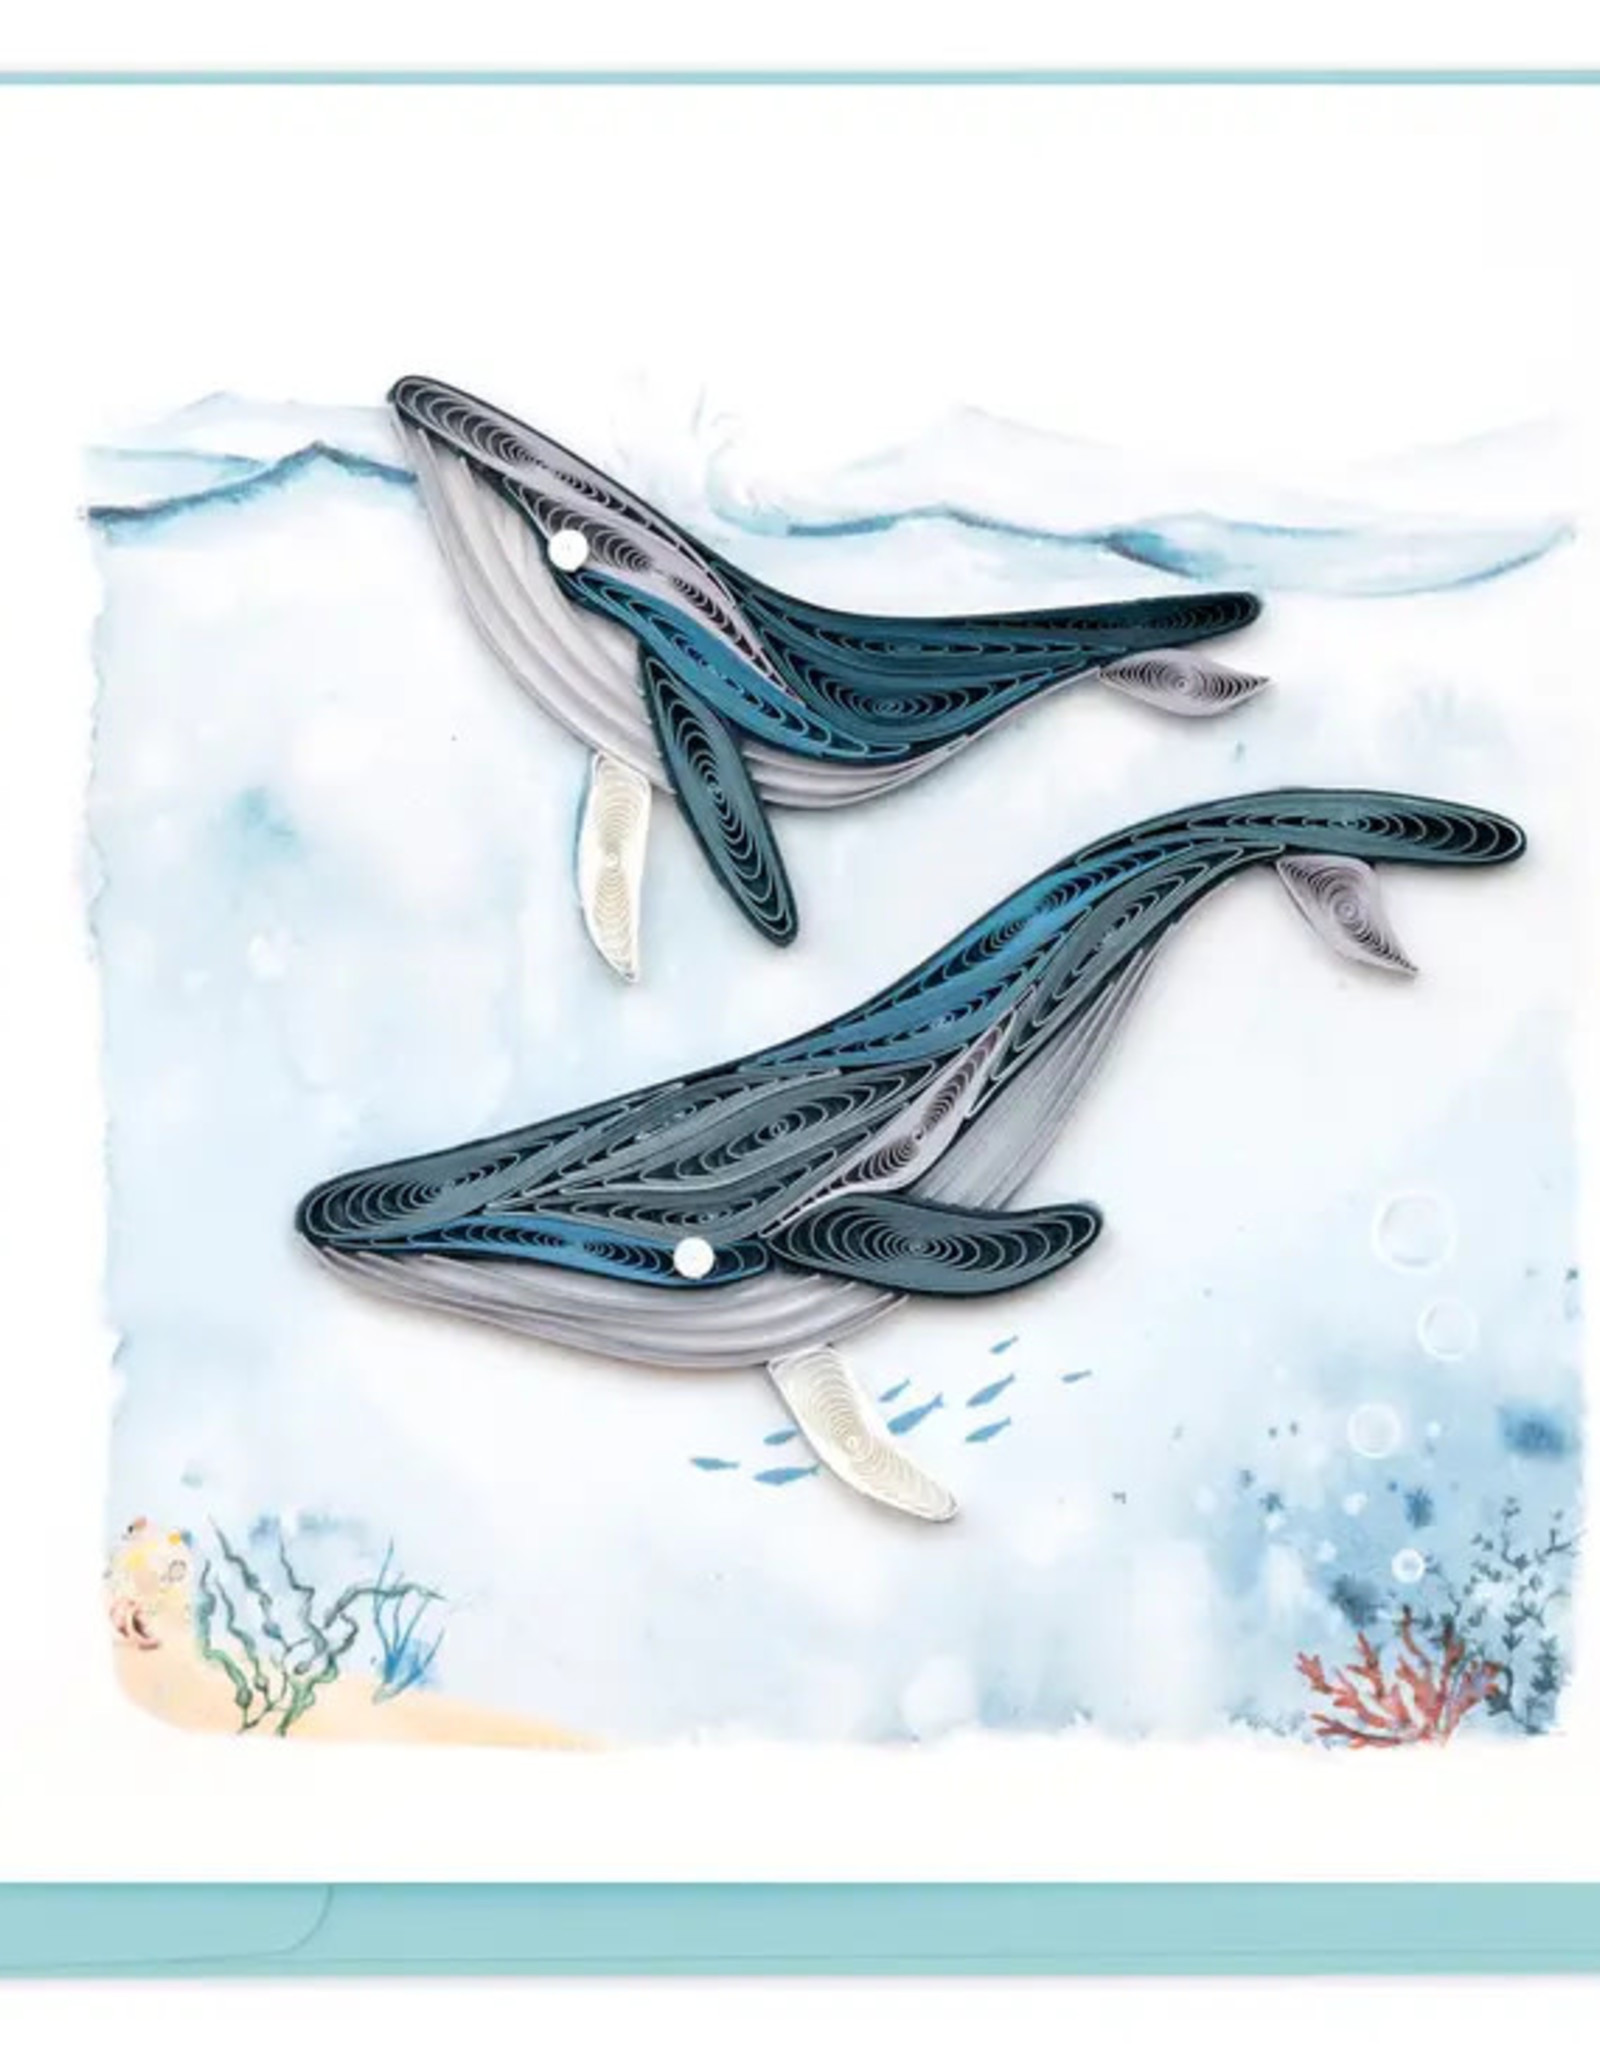 Quilling Card Quilled Two Humpbacks Greeting Card